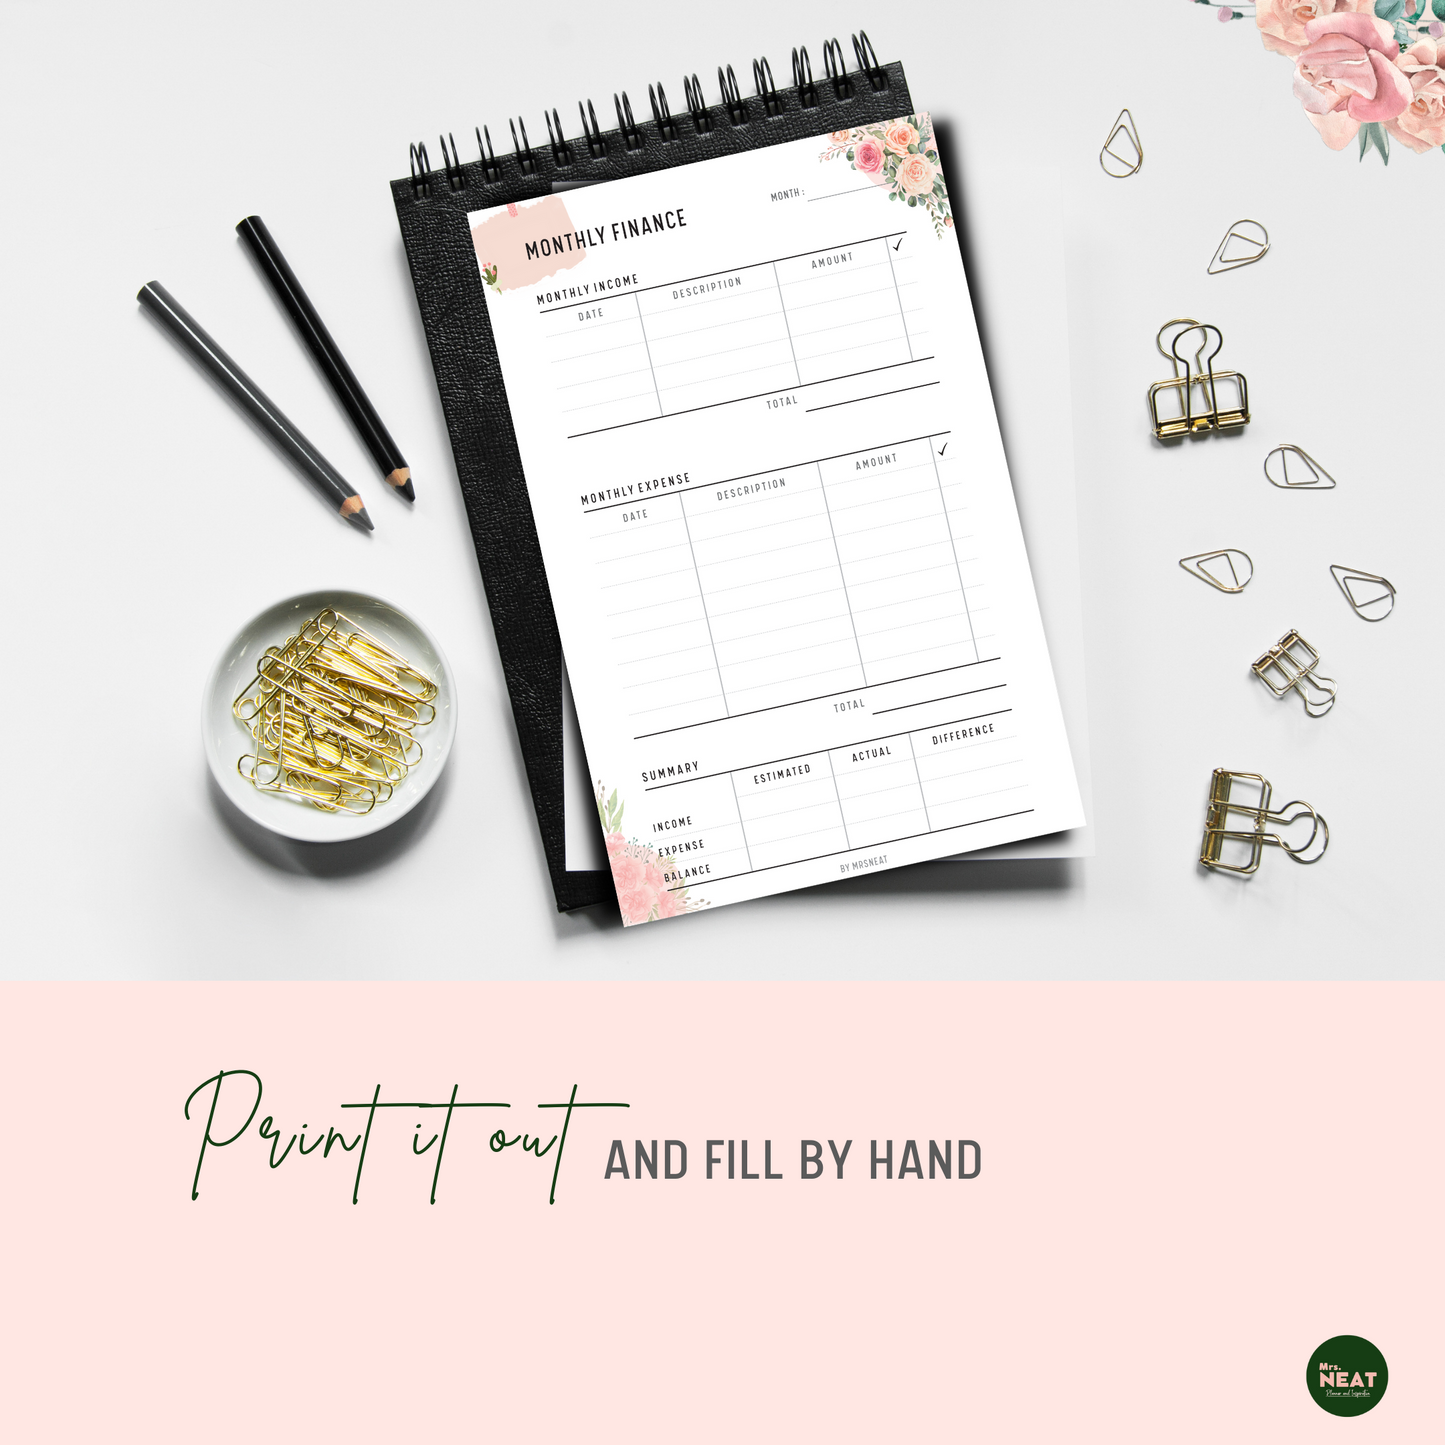 Floral Monthly Finance Planner printed out and put on the black book with aesthetic stationery surround